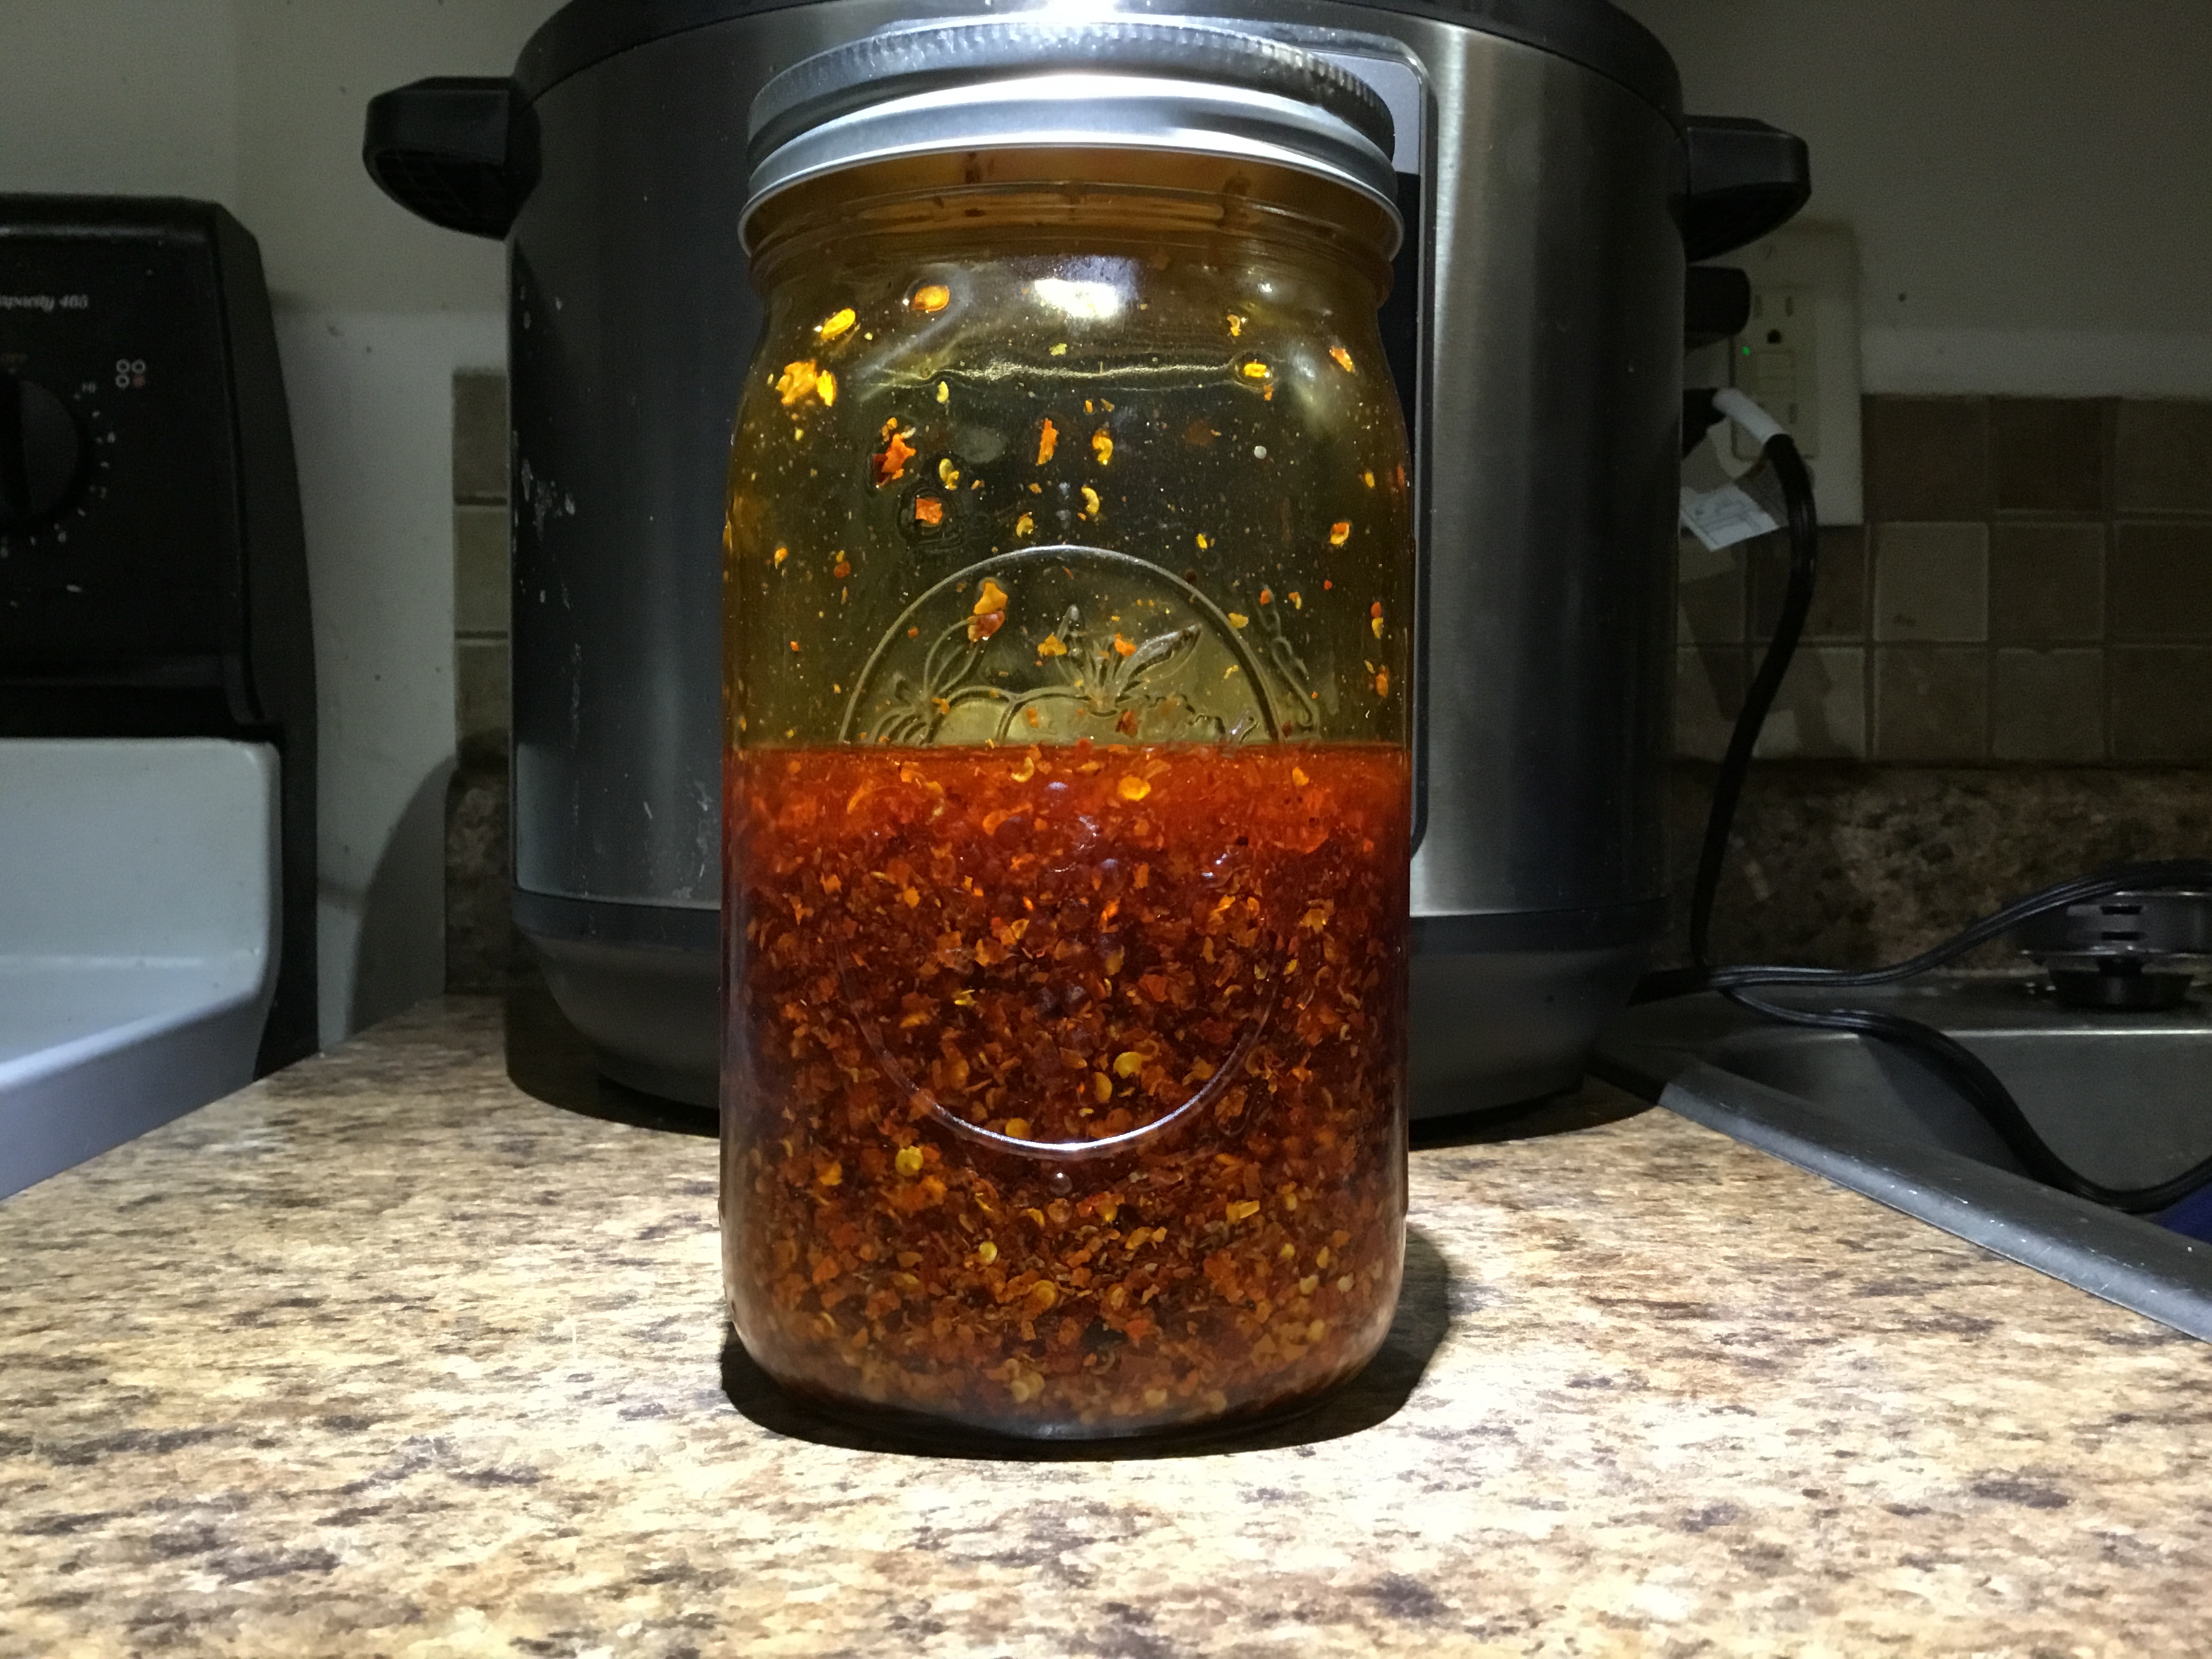 How to make Chili Oil in an Instant Pot